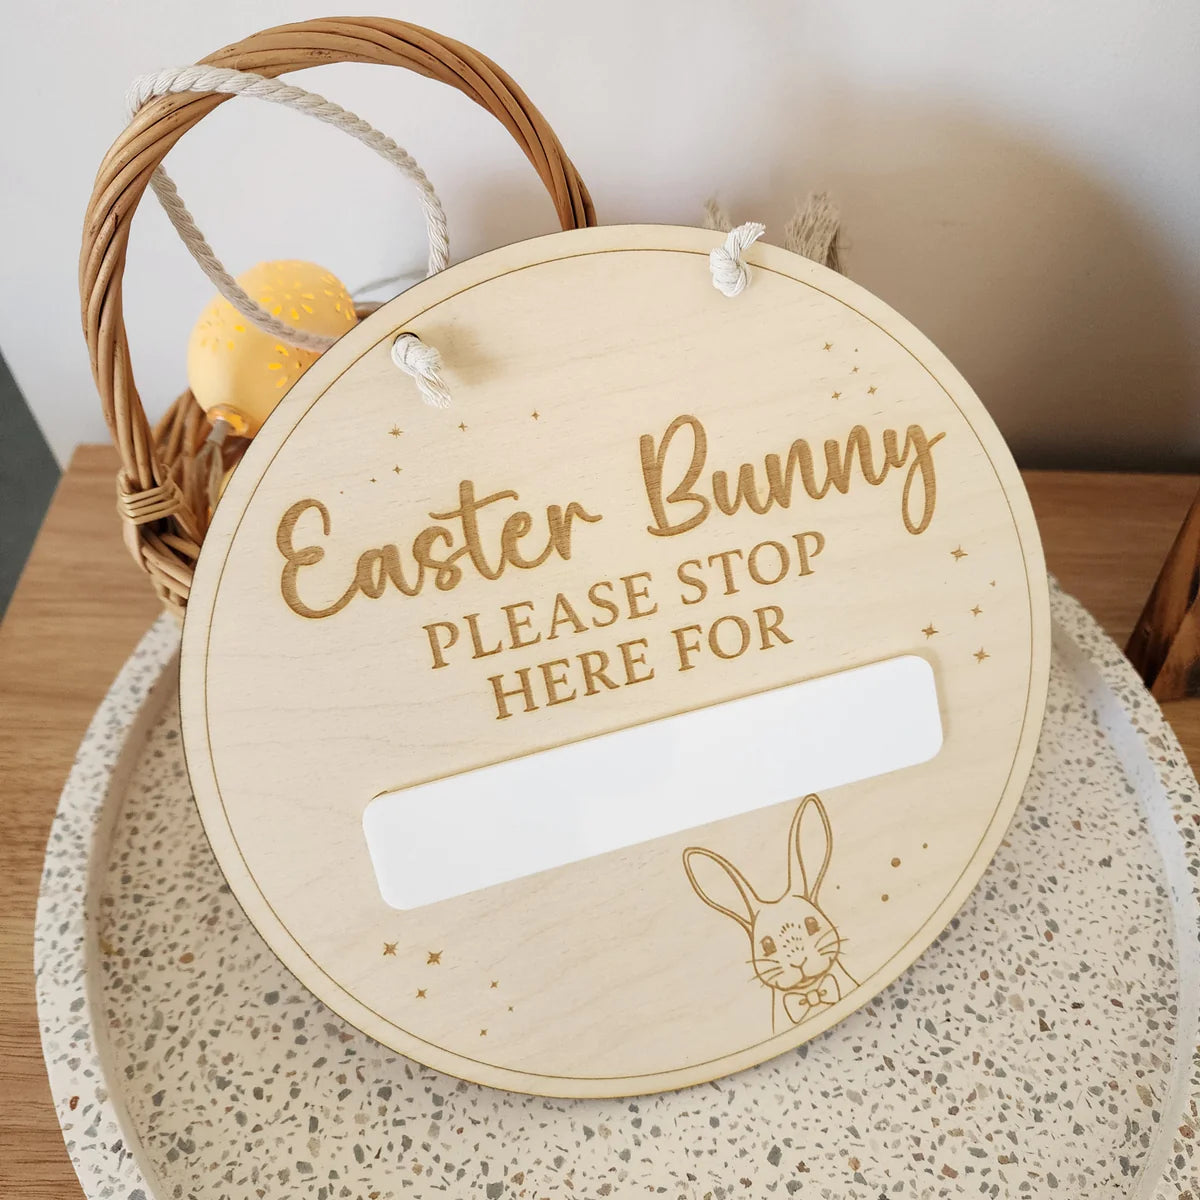 Personalised "Easter Bunny Please Stop Here For" - Reusable Wooden Sign